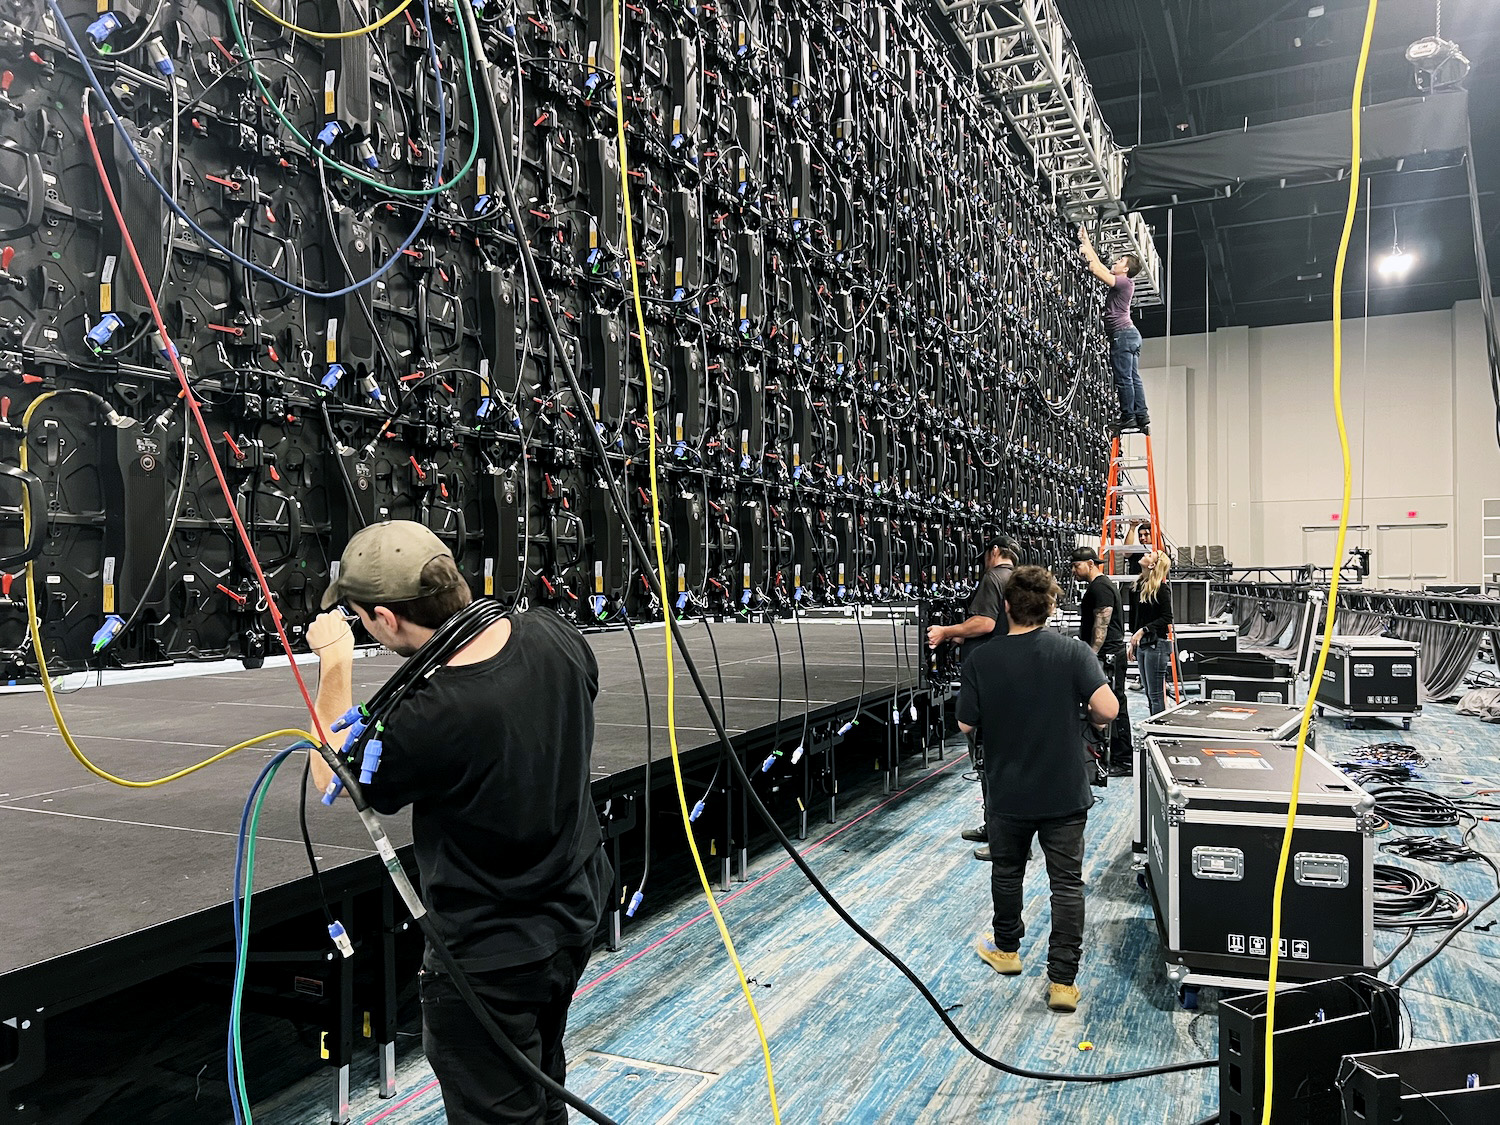 Audio Visual Nation technicians setting up an LED wall at an event